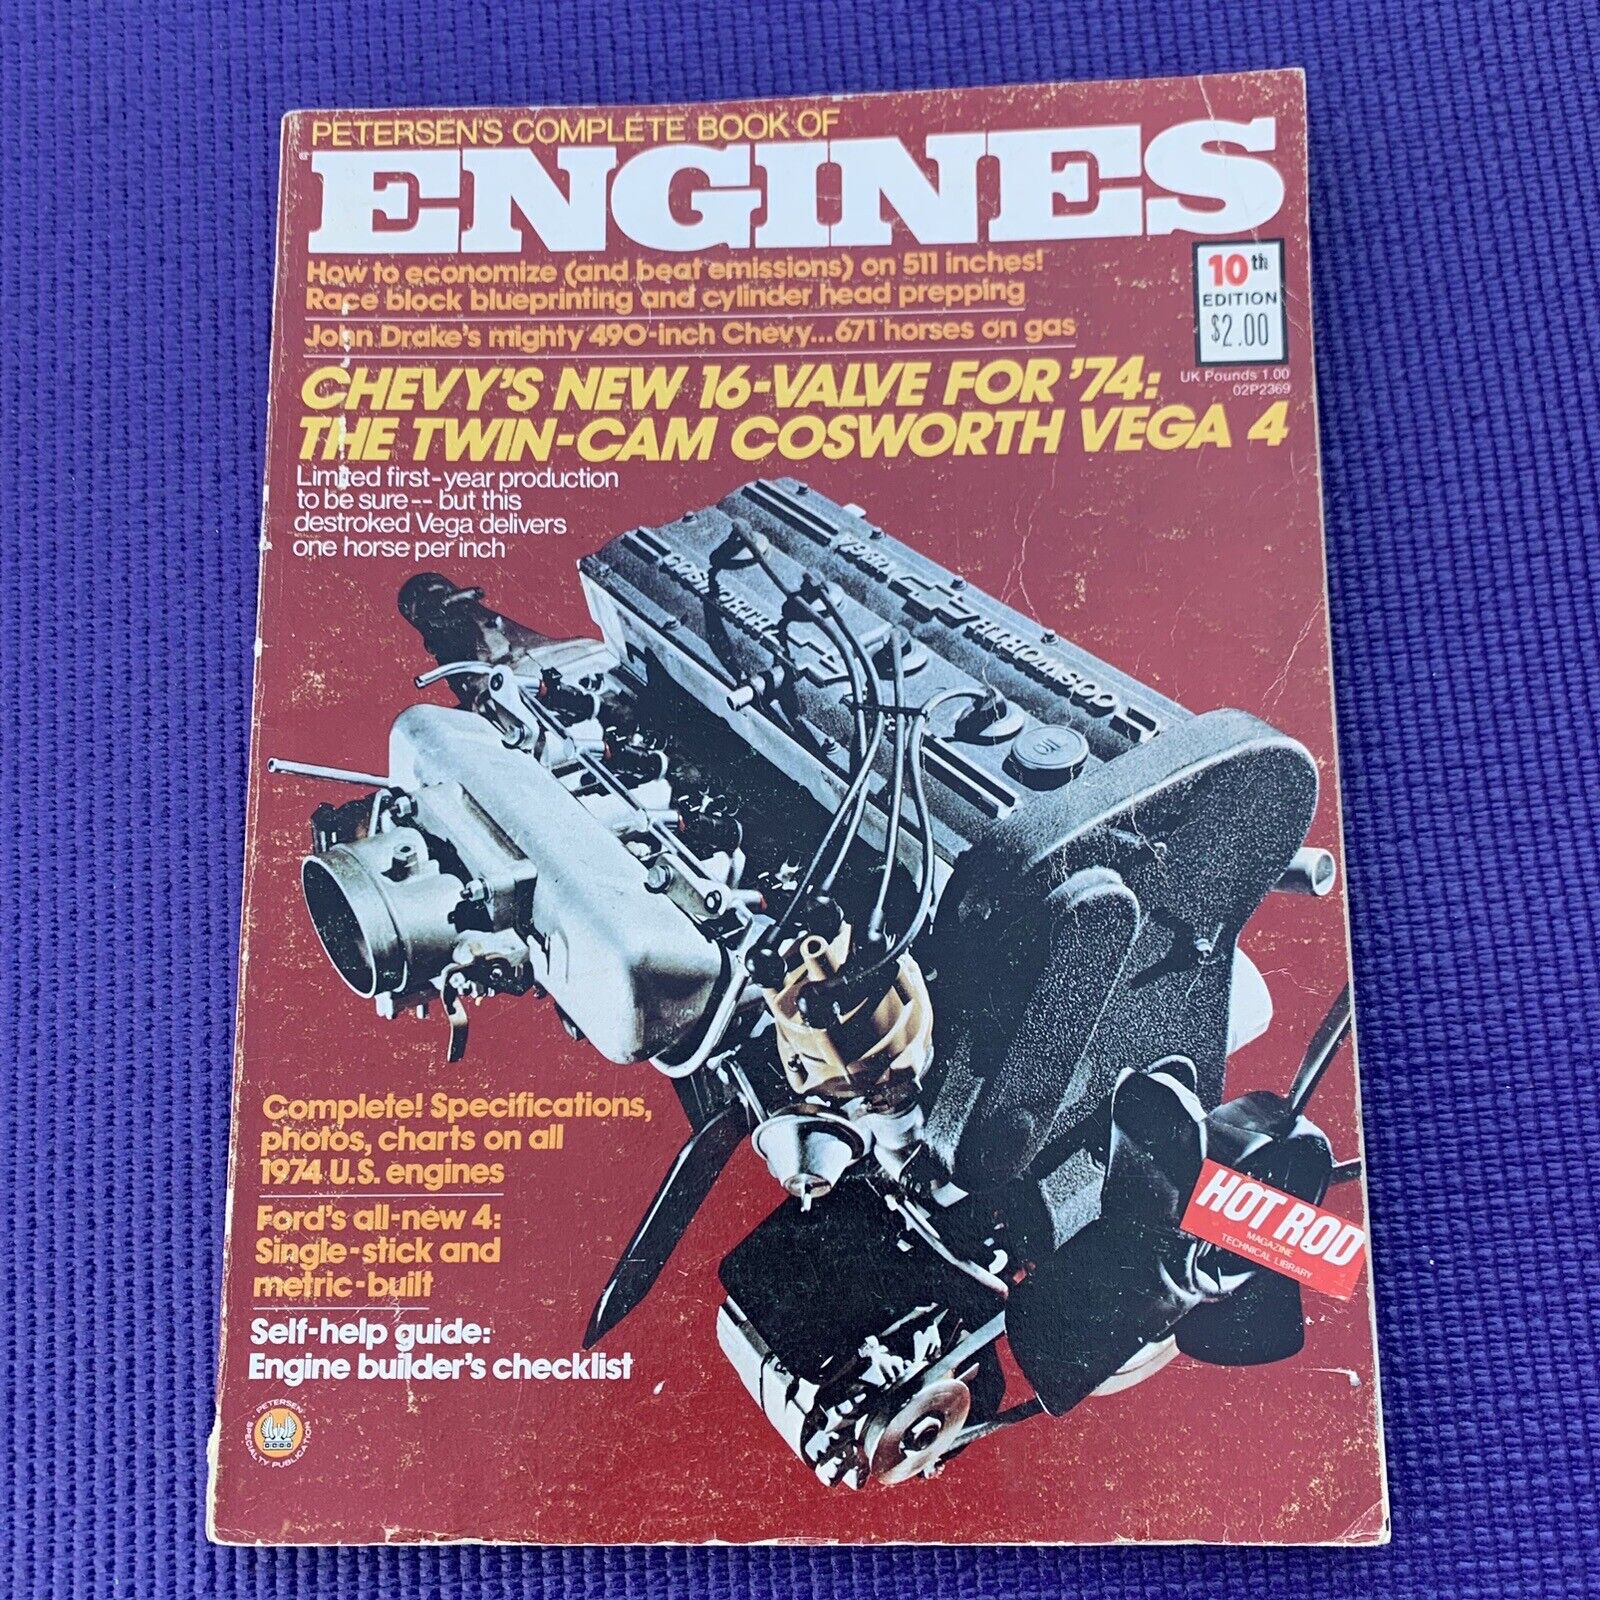 PETERSON Complete book of engines 10th edition 192 page book 1974 Cosworth